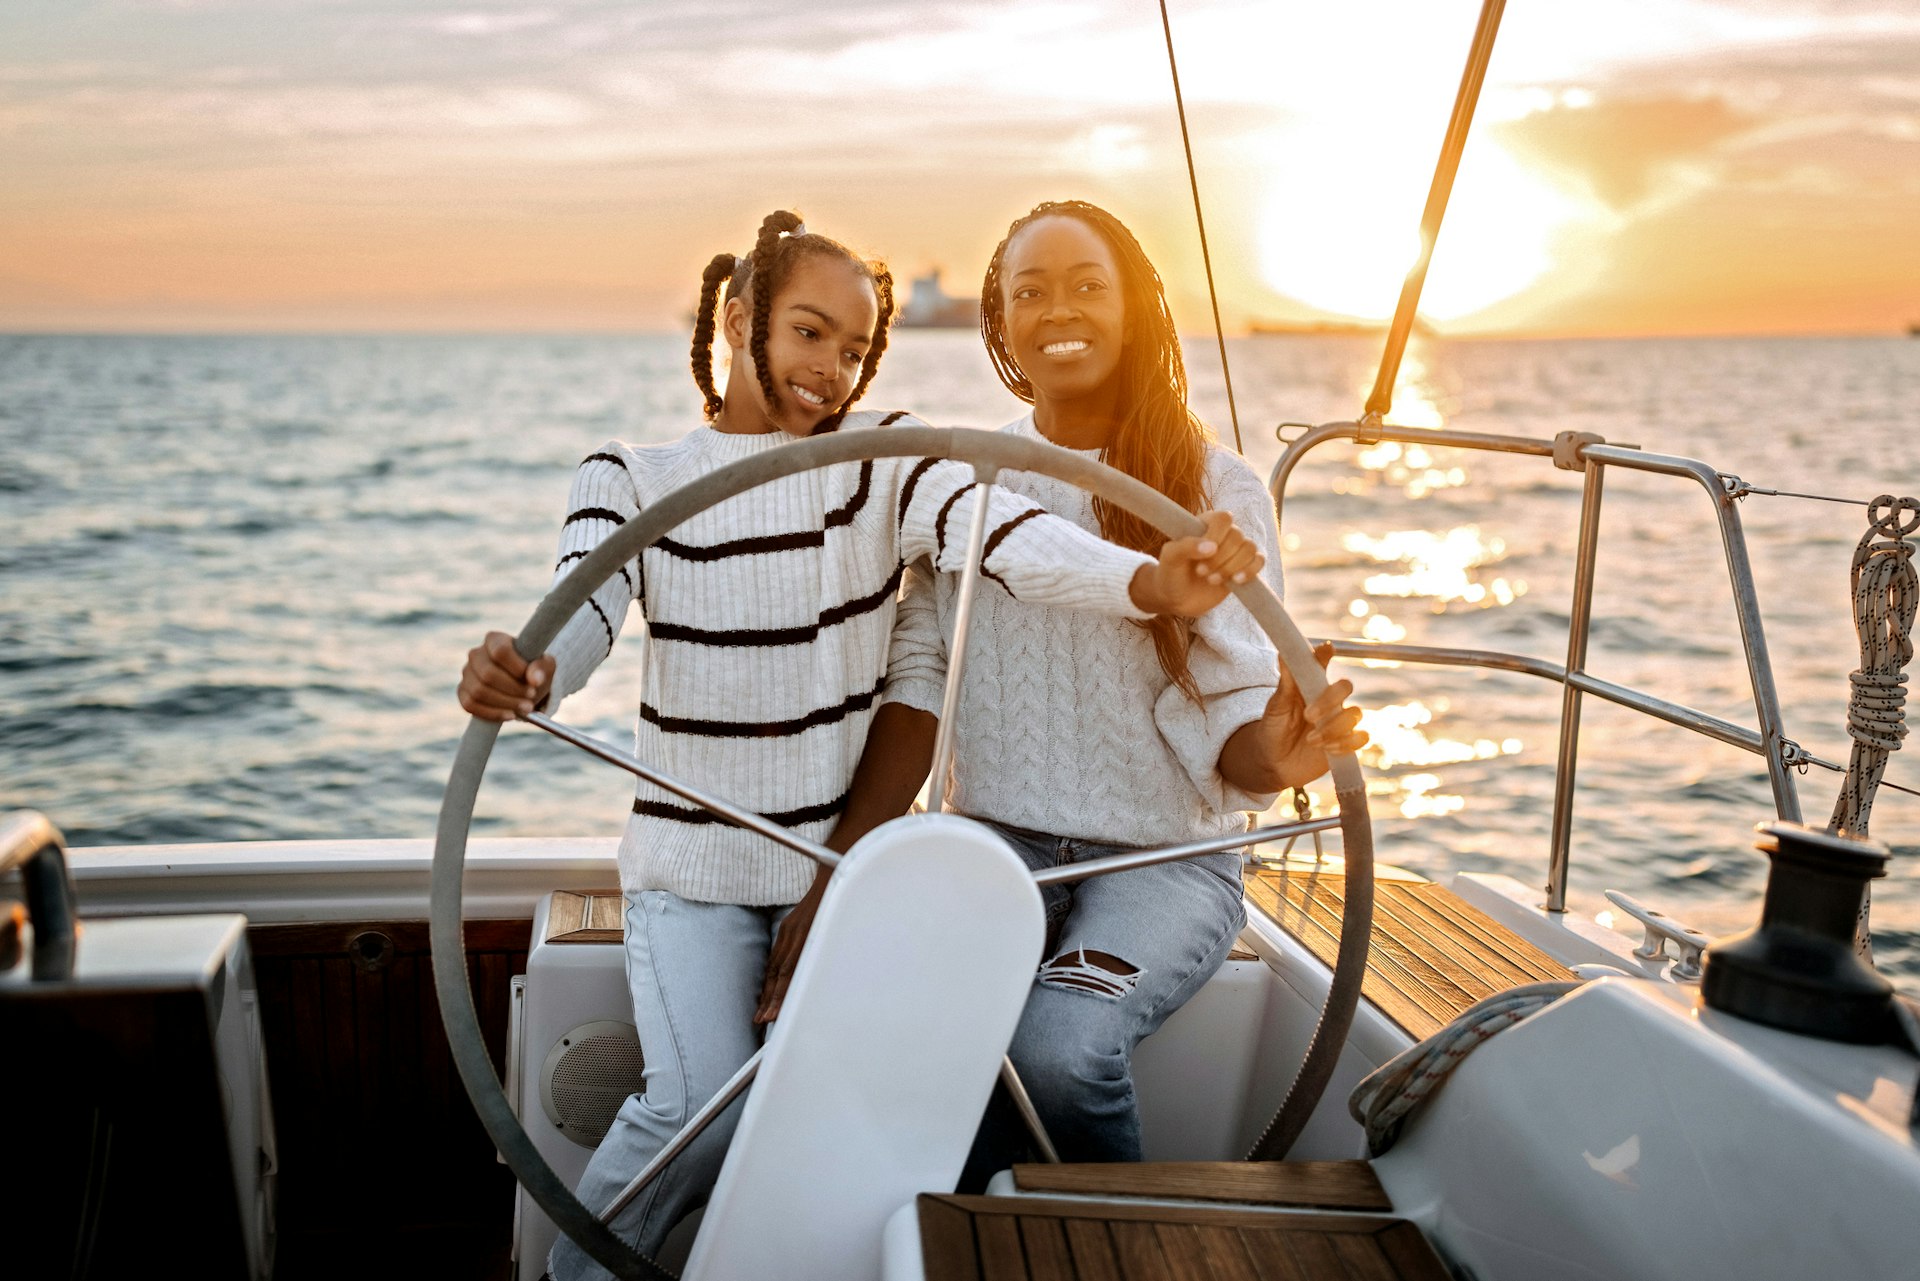 Mother and daughter sailing together in Greece as the sunsets in the background